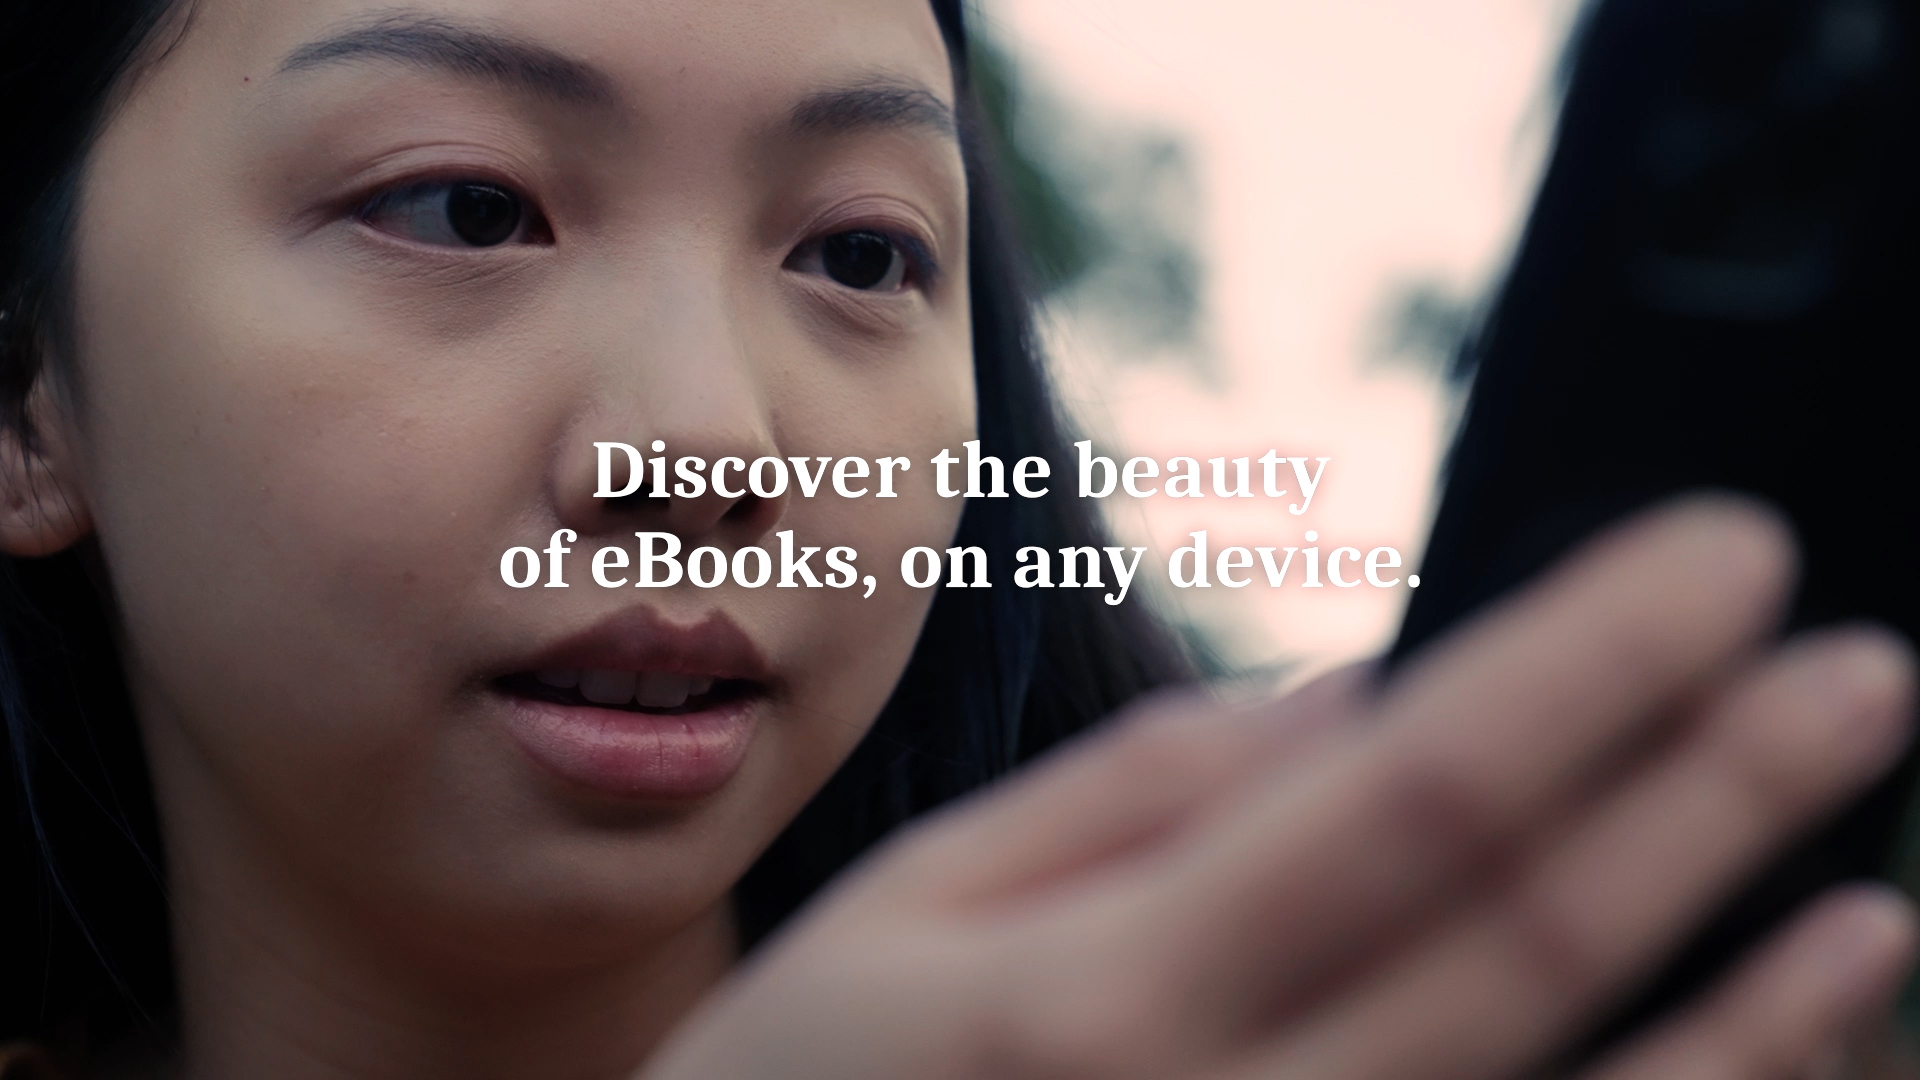 Discover the beauty of eBooks, on any internet-enabled device.